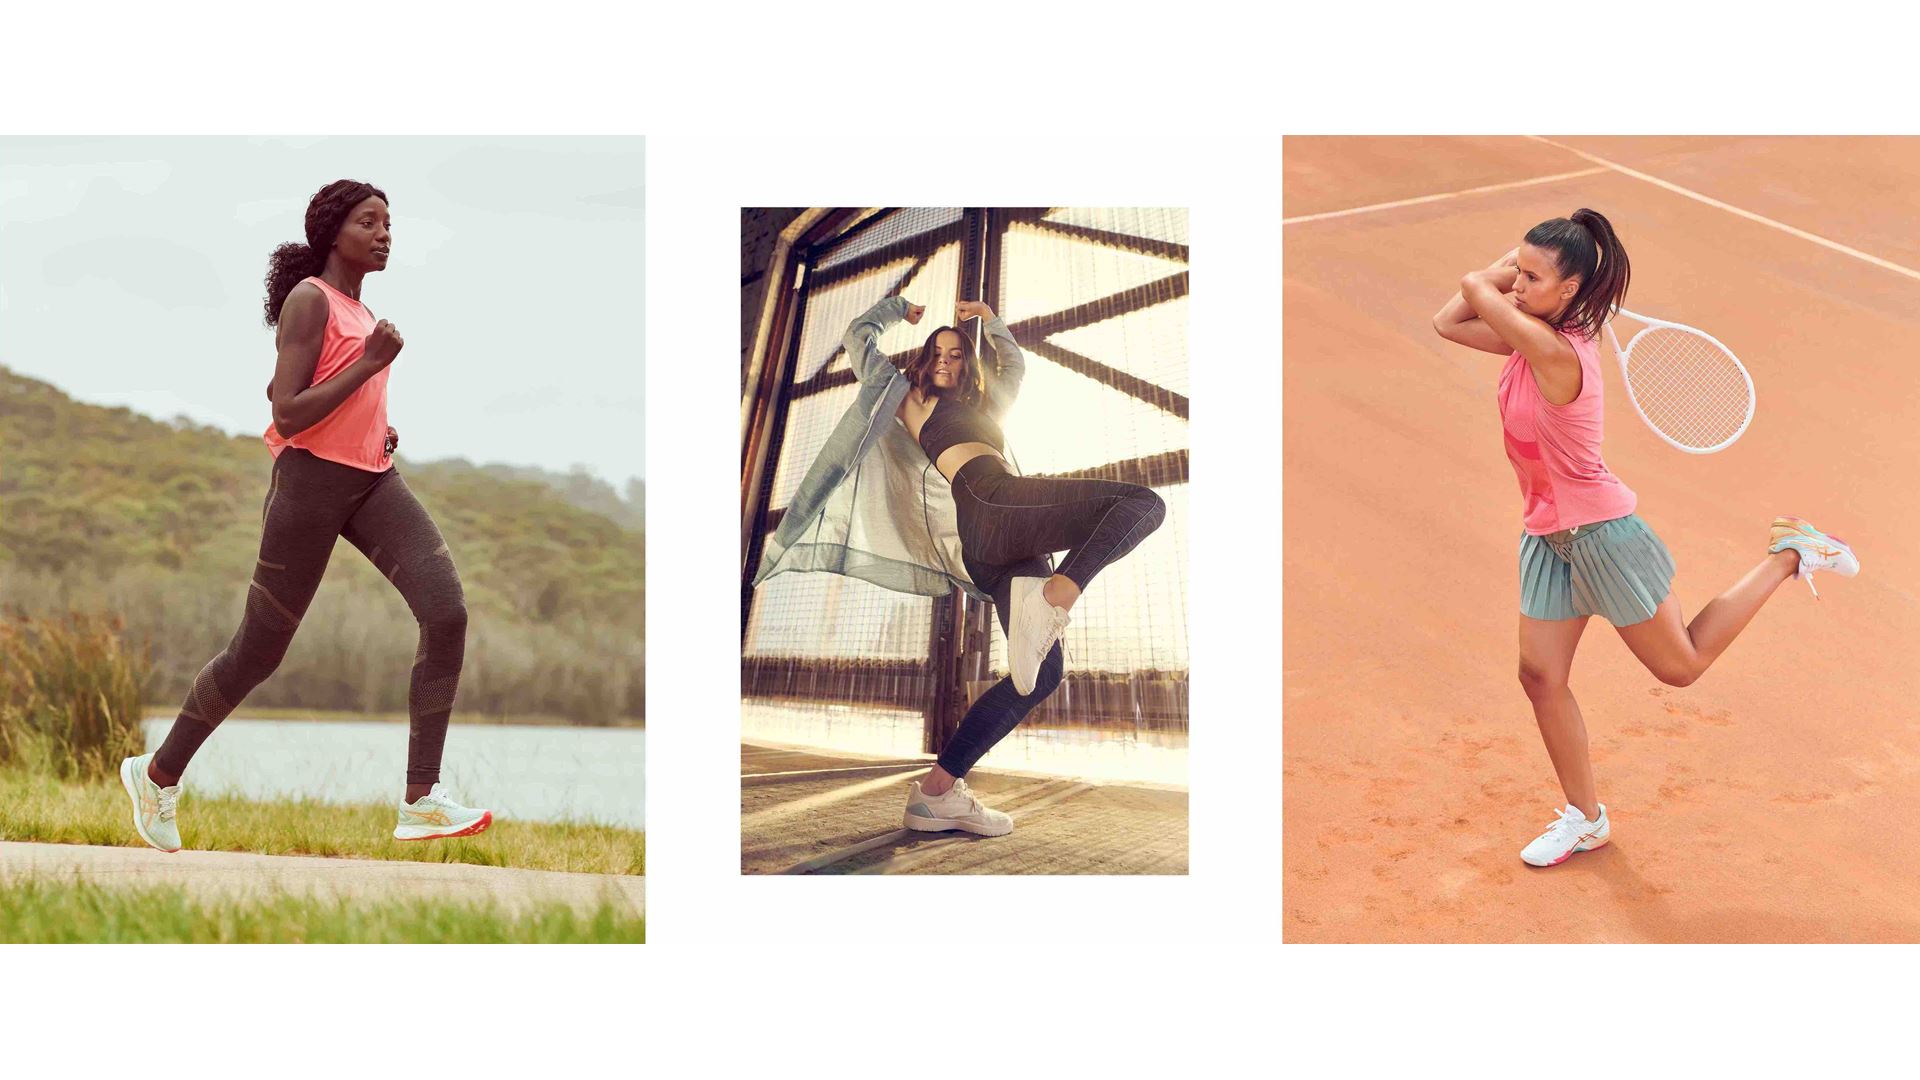 ASICS introduces the all-new ASICS Women’s Collection